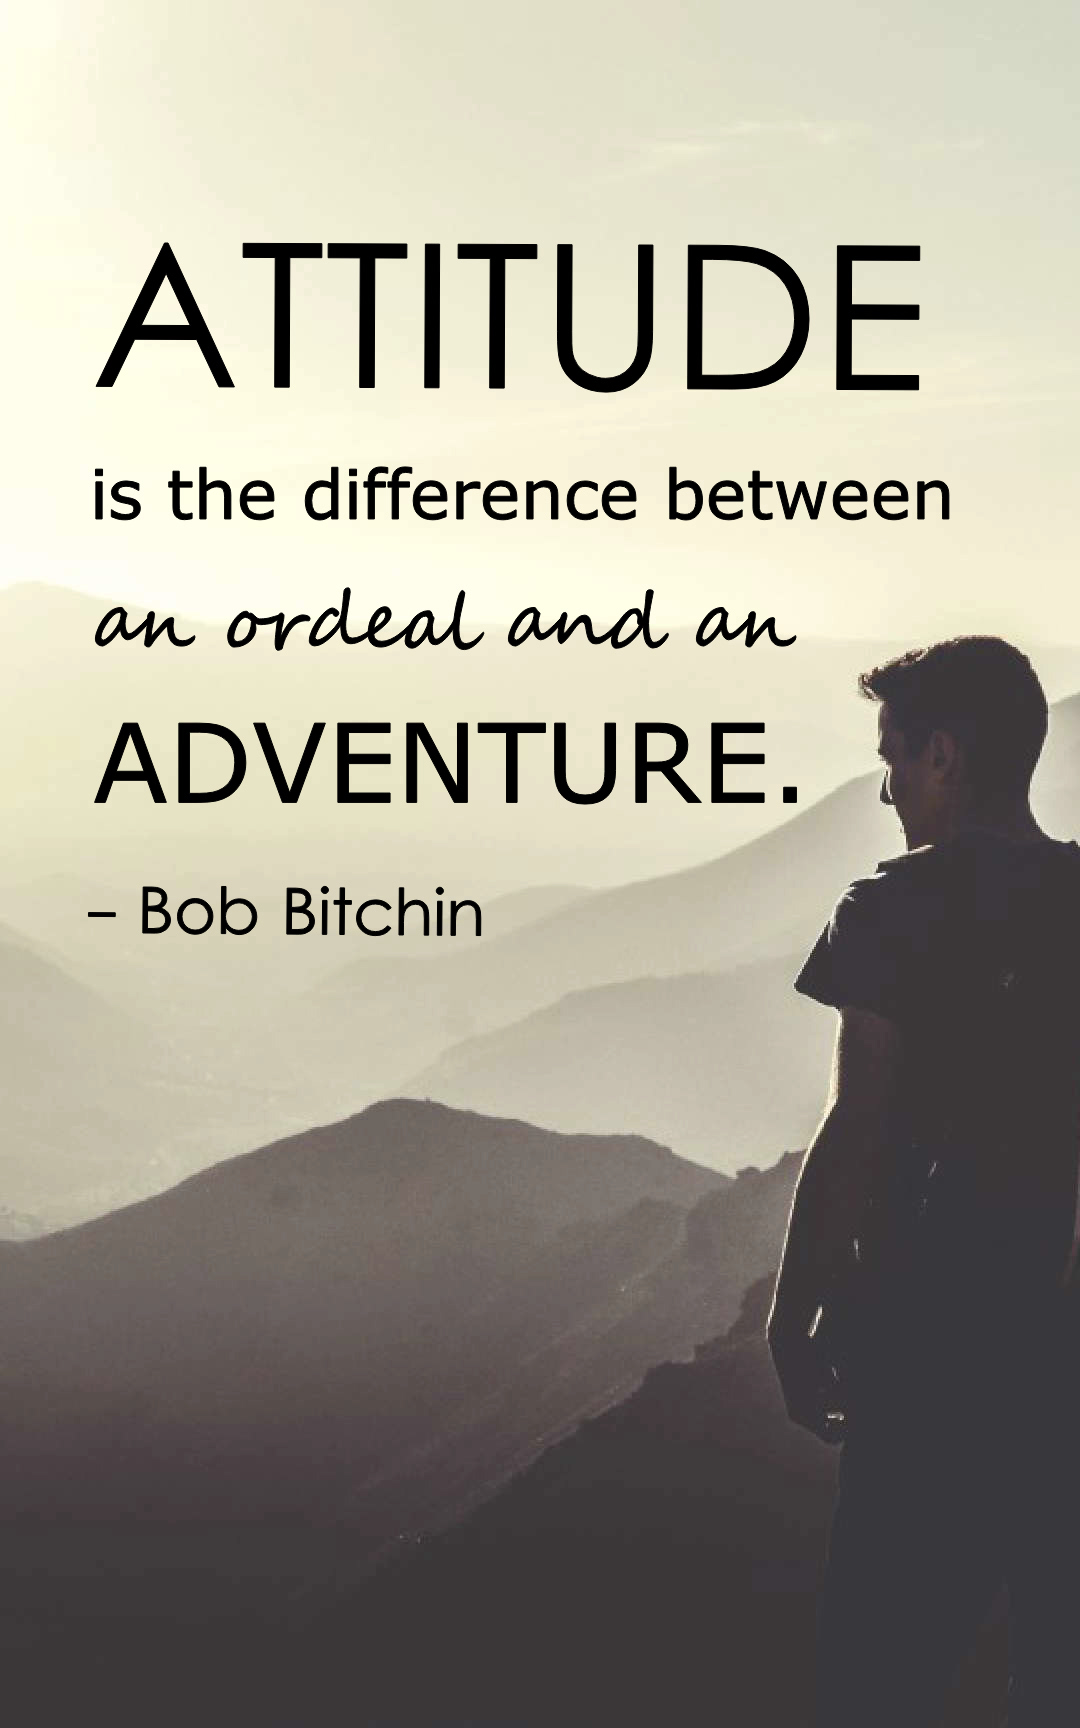 Attitude is the difference between an ordeal and an adventure.